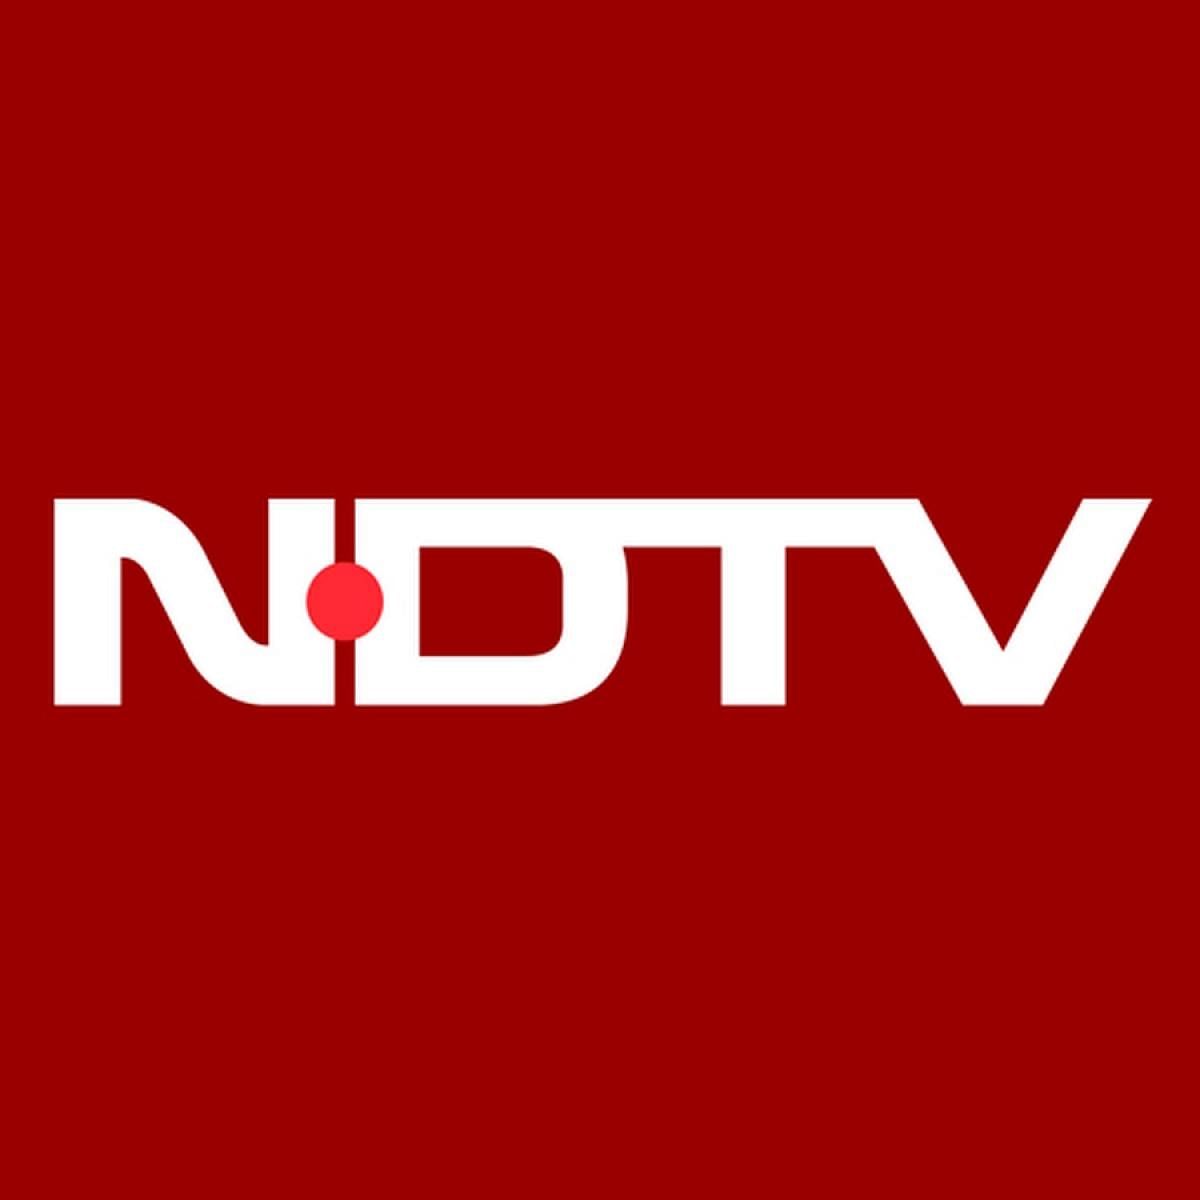 NDTV said the notice has been issued alleging violation of provisions of Section 12A (d) and (e) of Sebi Act read with Regulation 3(i) and Regulation 4 of Sebi (Prohibition of lnsider Trading) Regulations, 1992. File photo